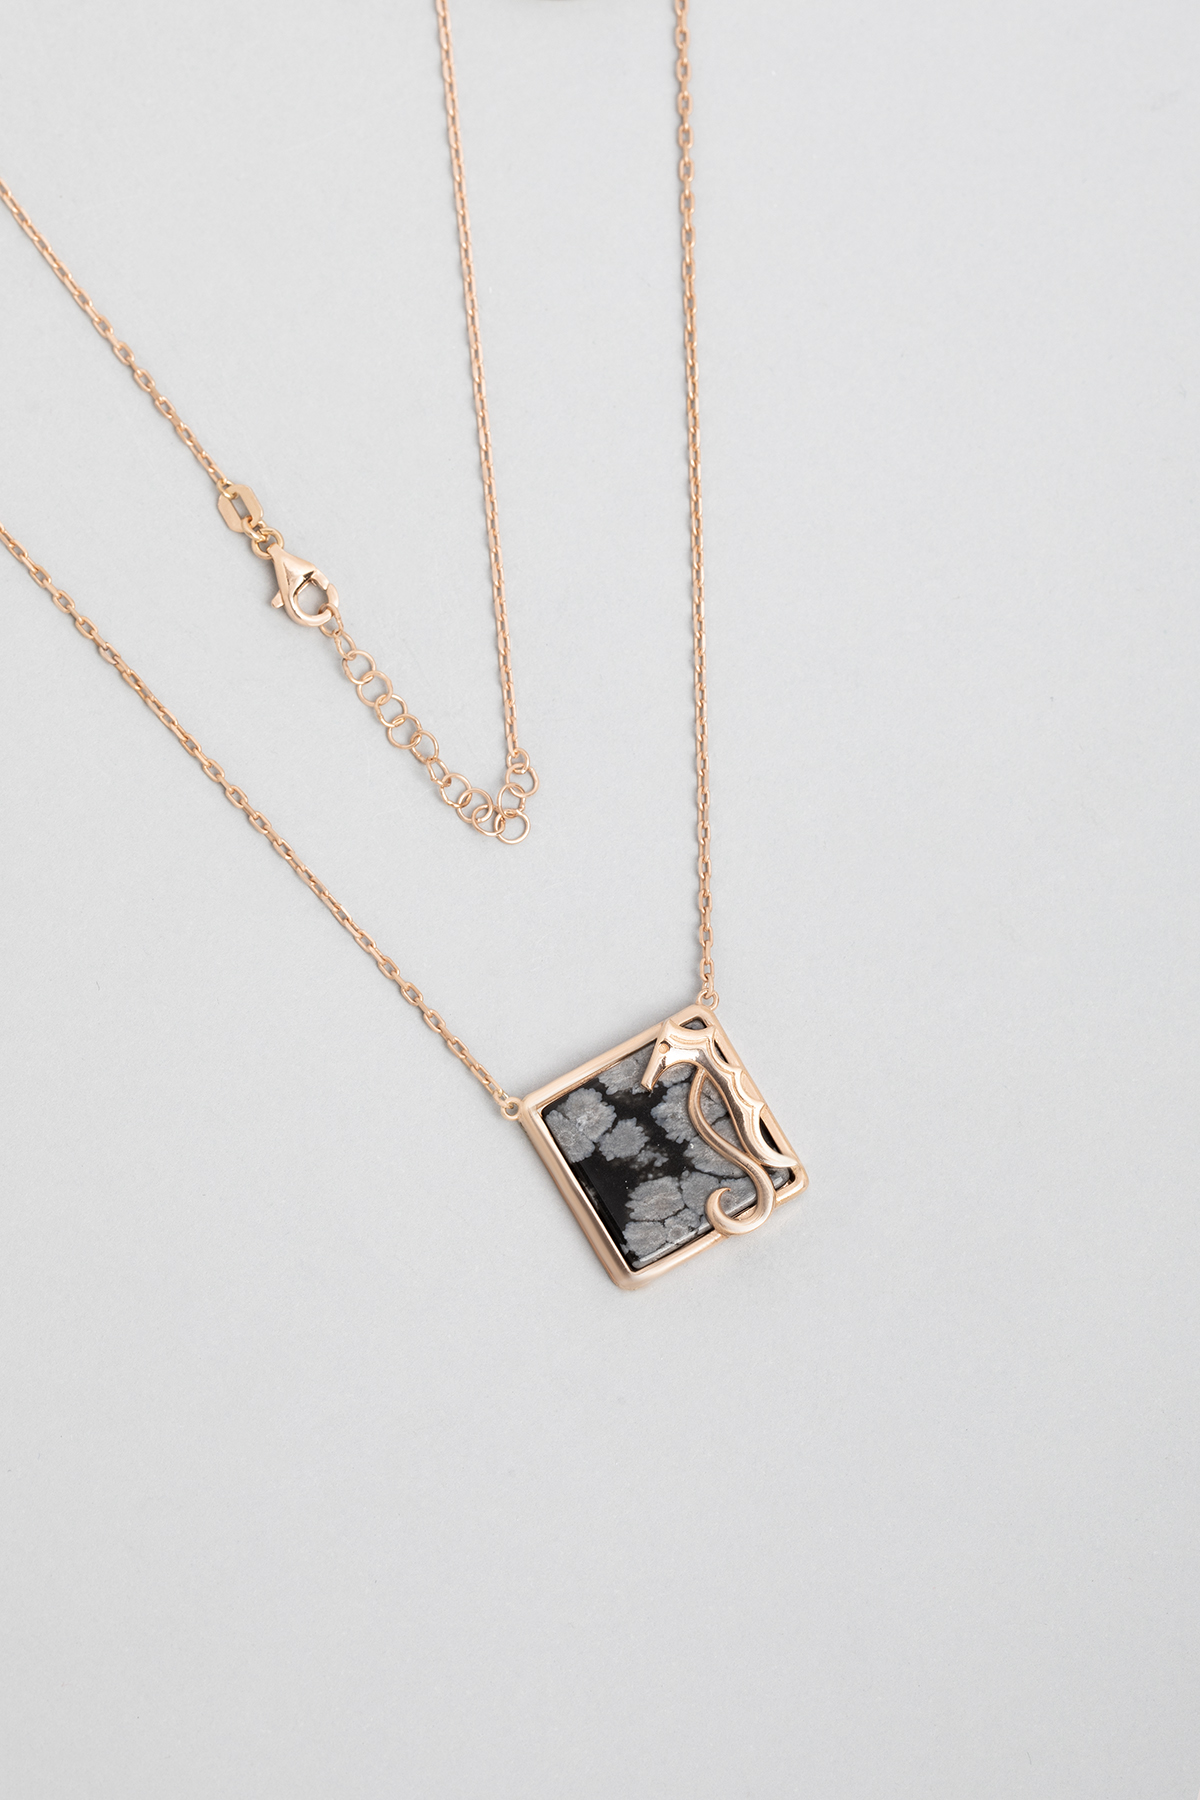 18 Karat Rose Gold Plated Silver Necklace with Dalmatian Stone